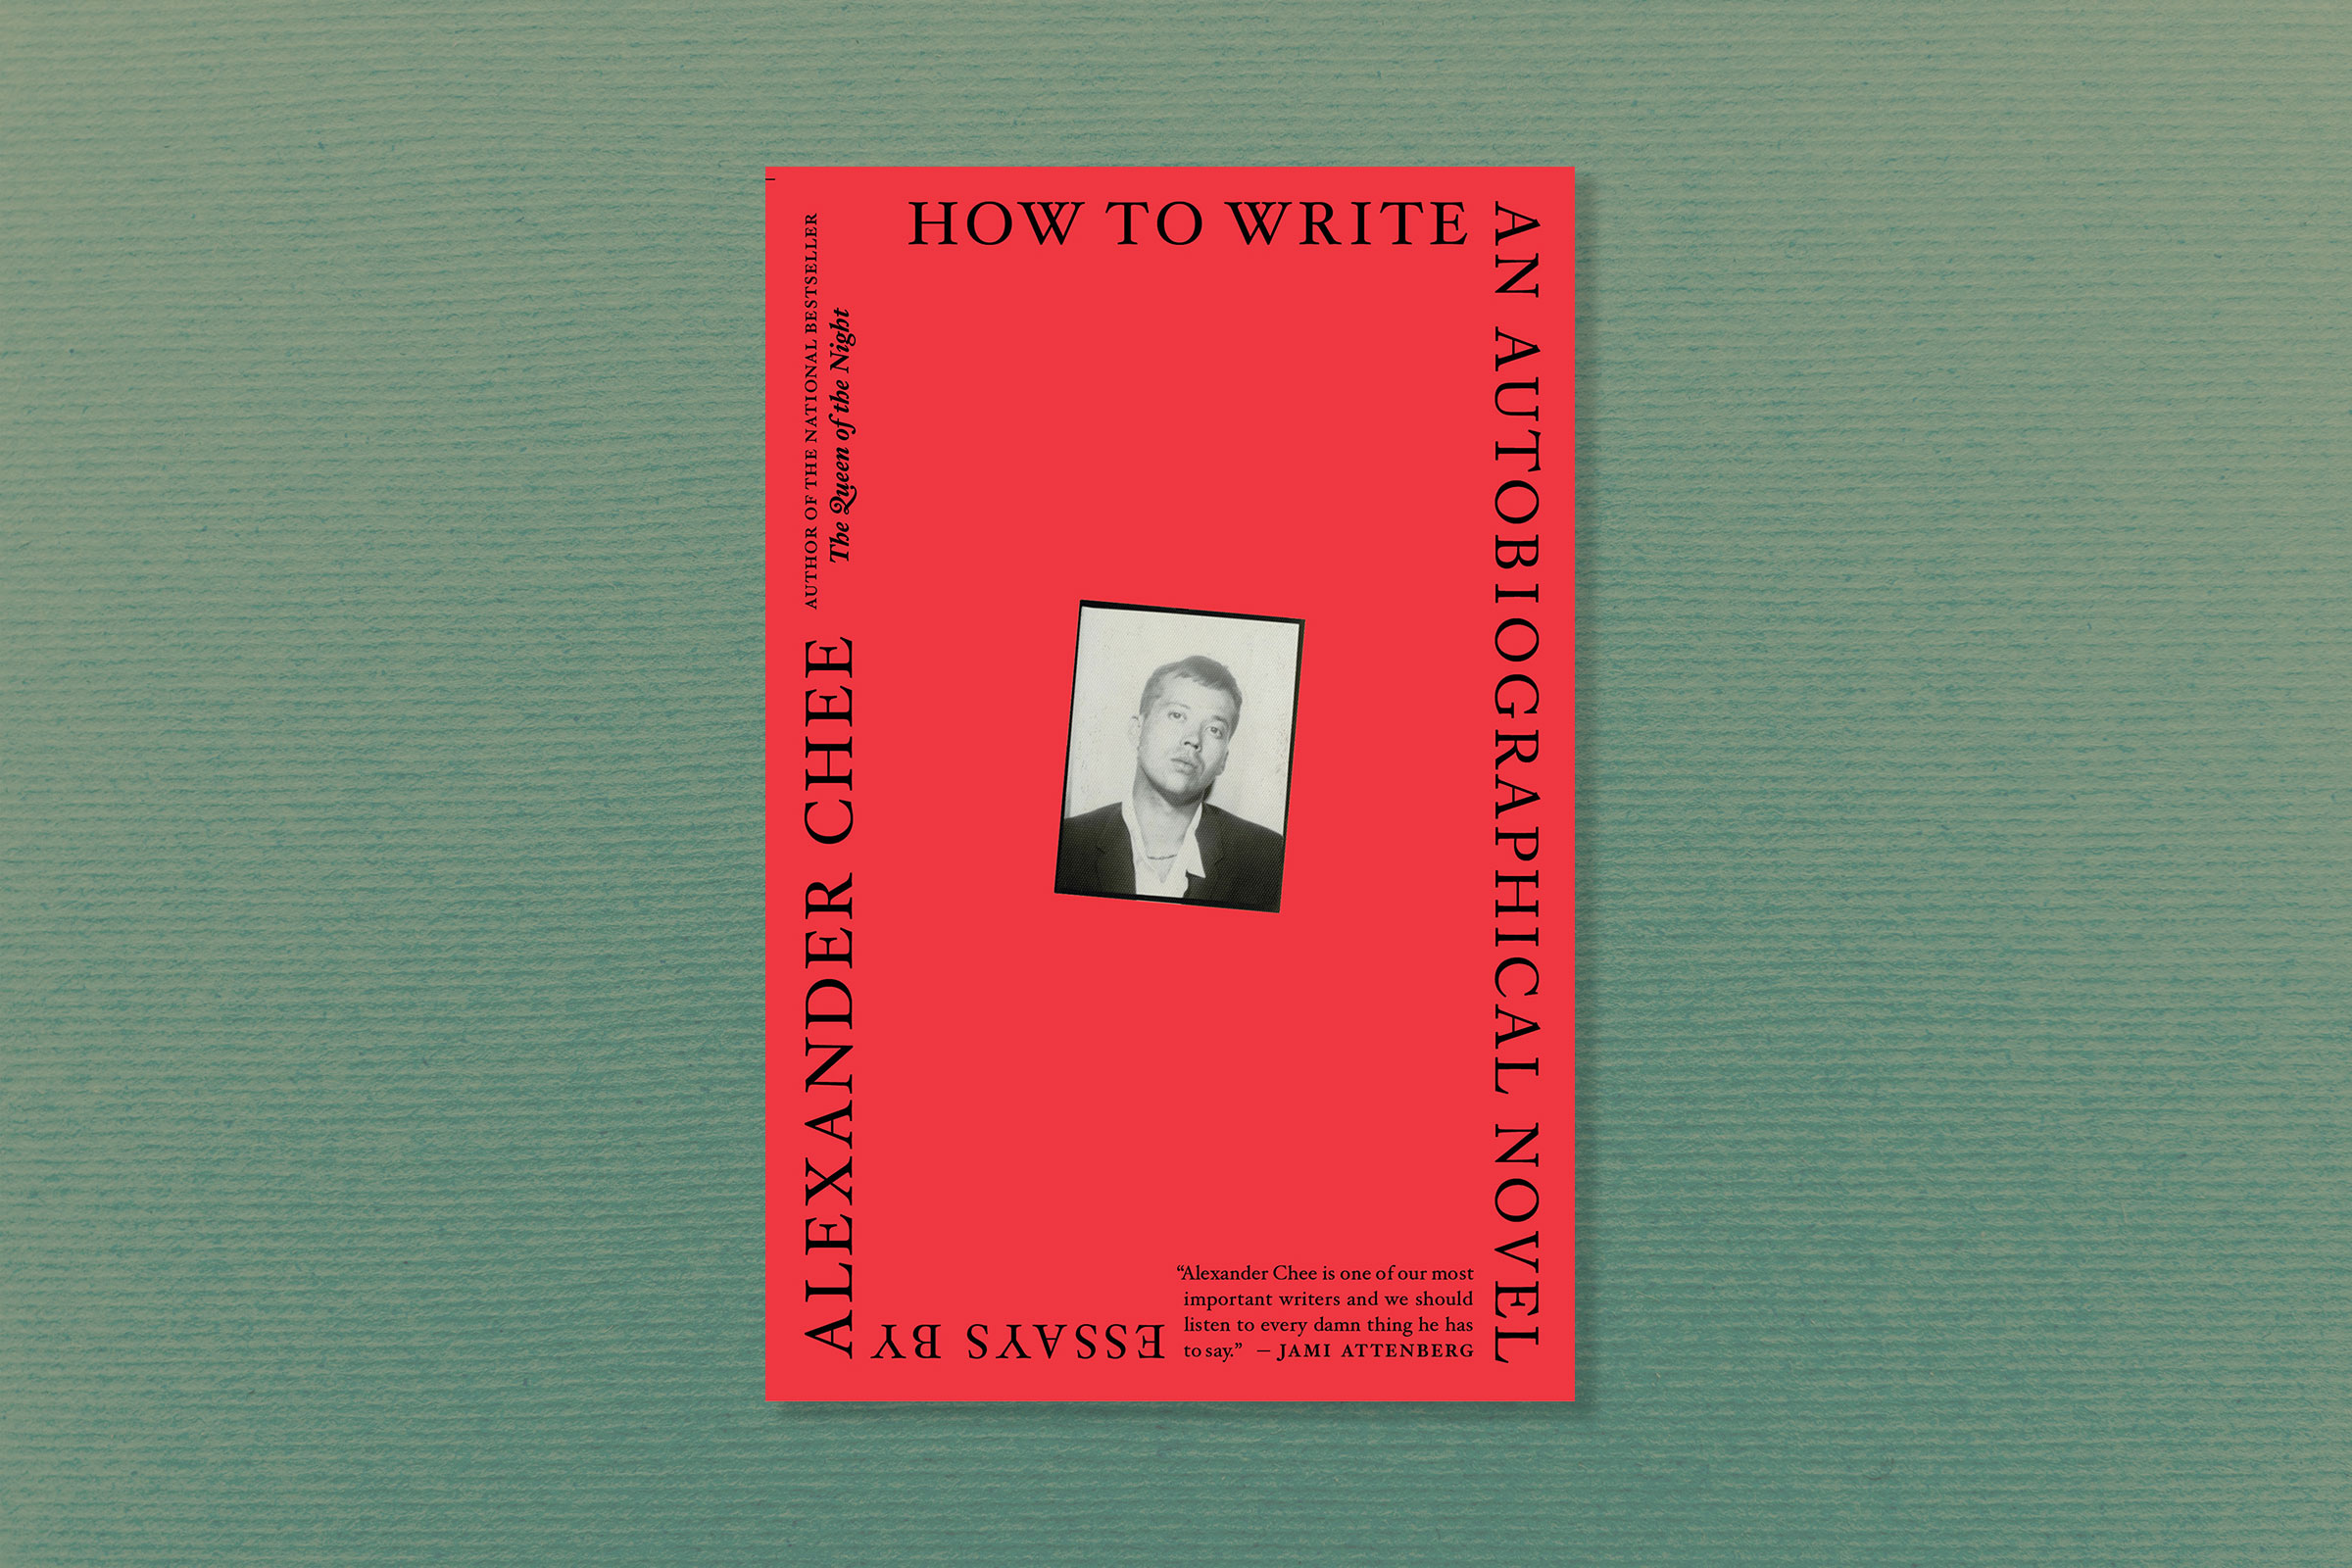 How to Write an Autobiographical Novel, by Alexander Chee